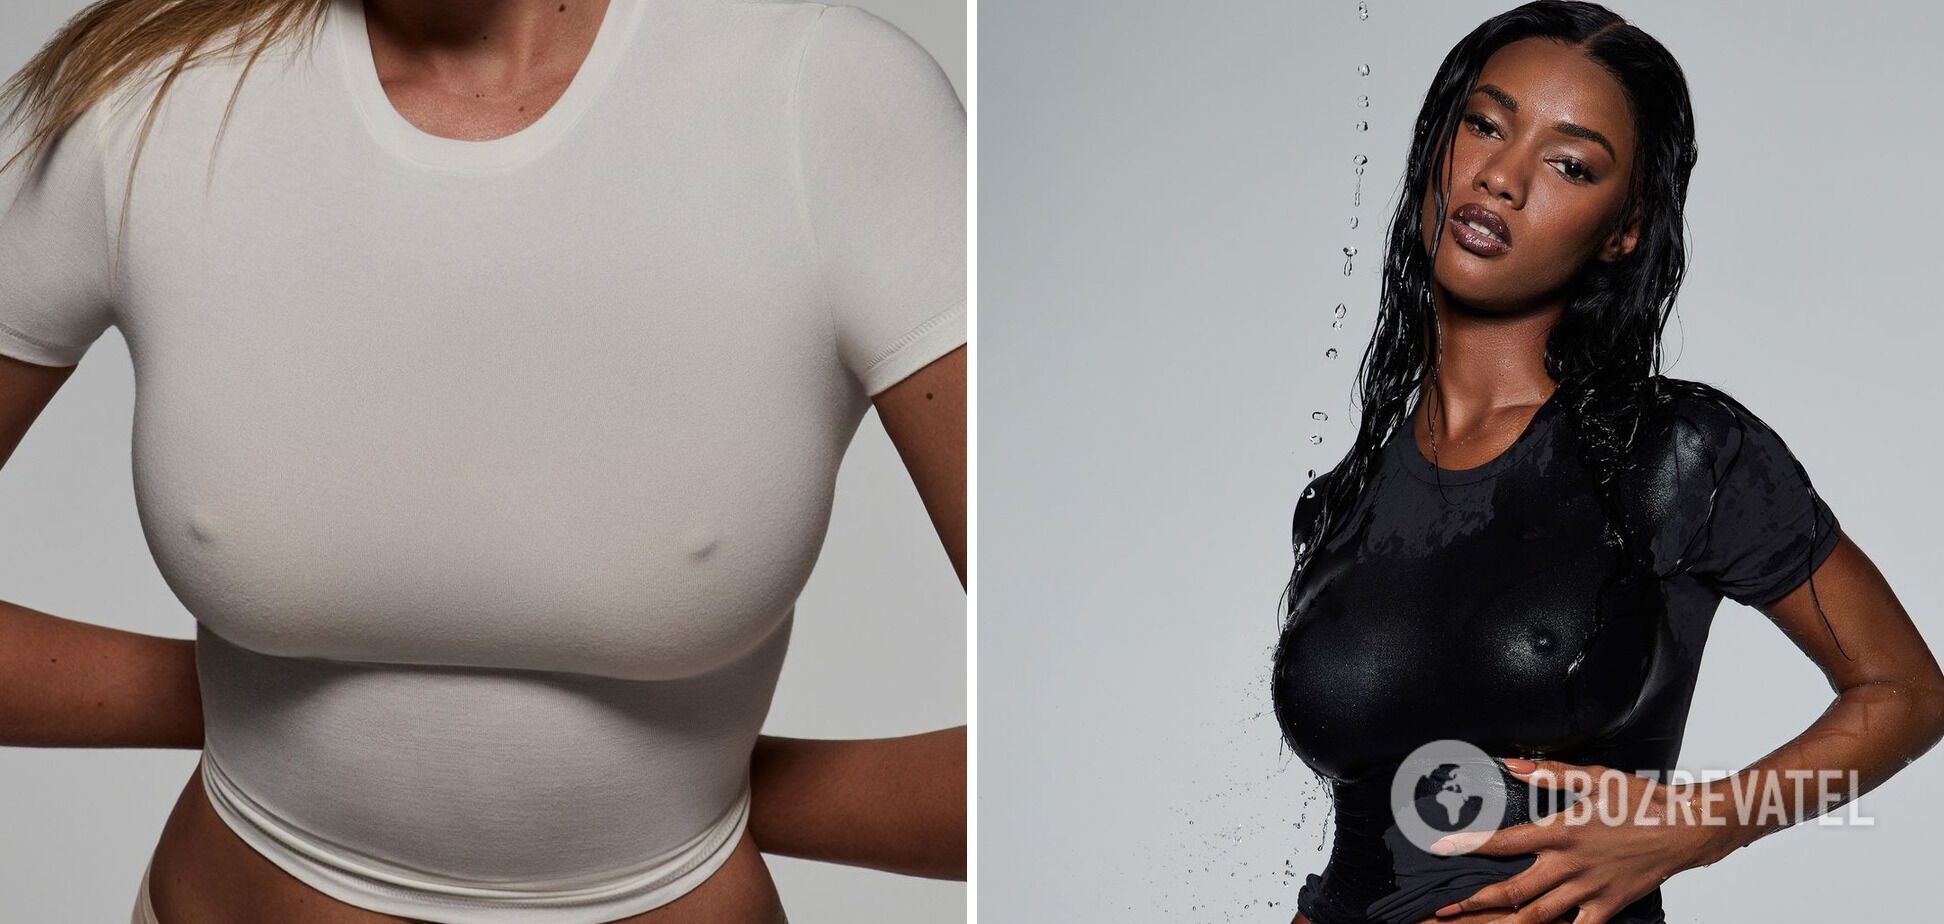 Why Kim Kardashian's nipple bra confused the web and how it could